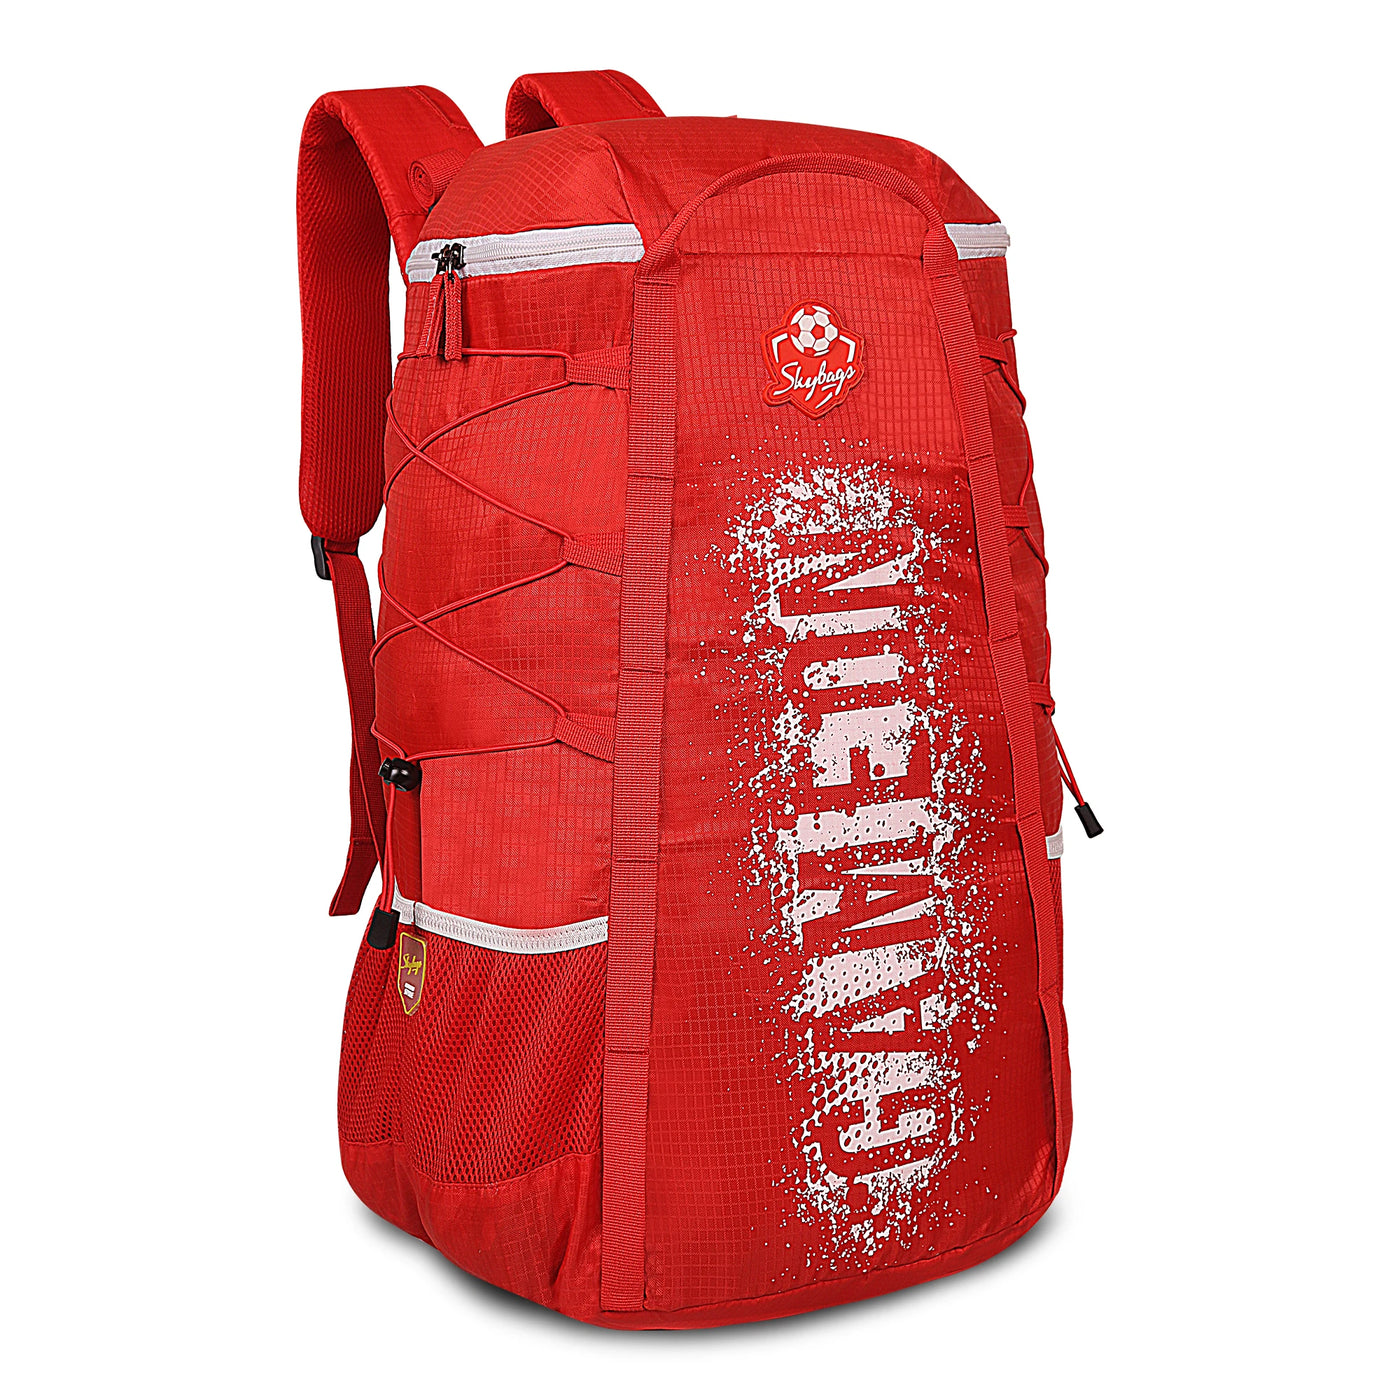 Skybags Camp "01 Rucksack 45L Red"